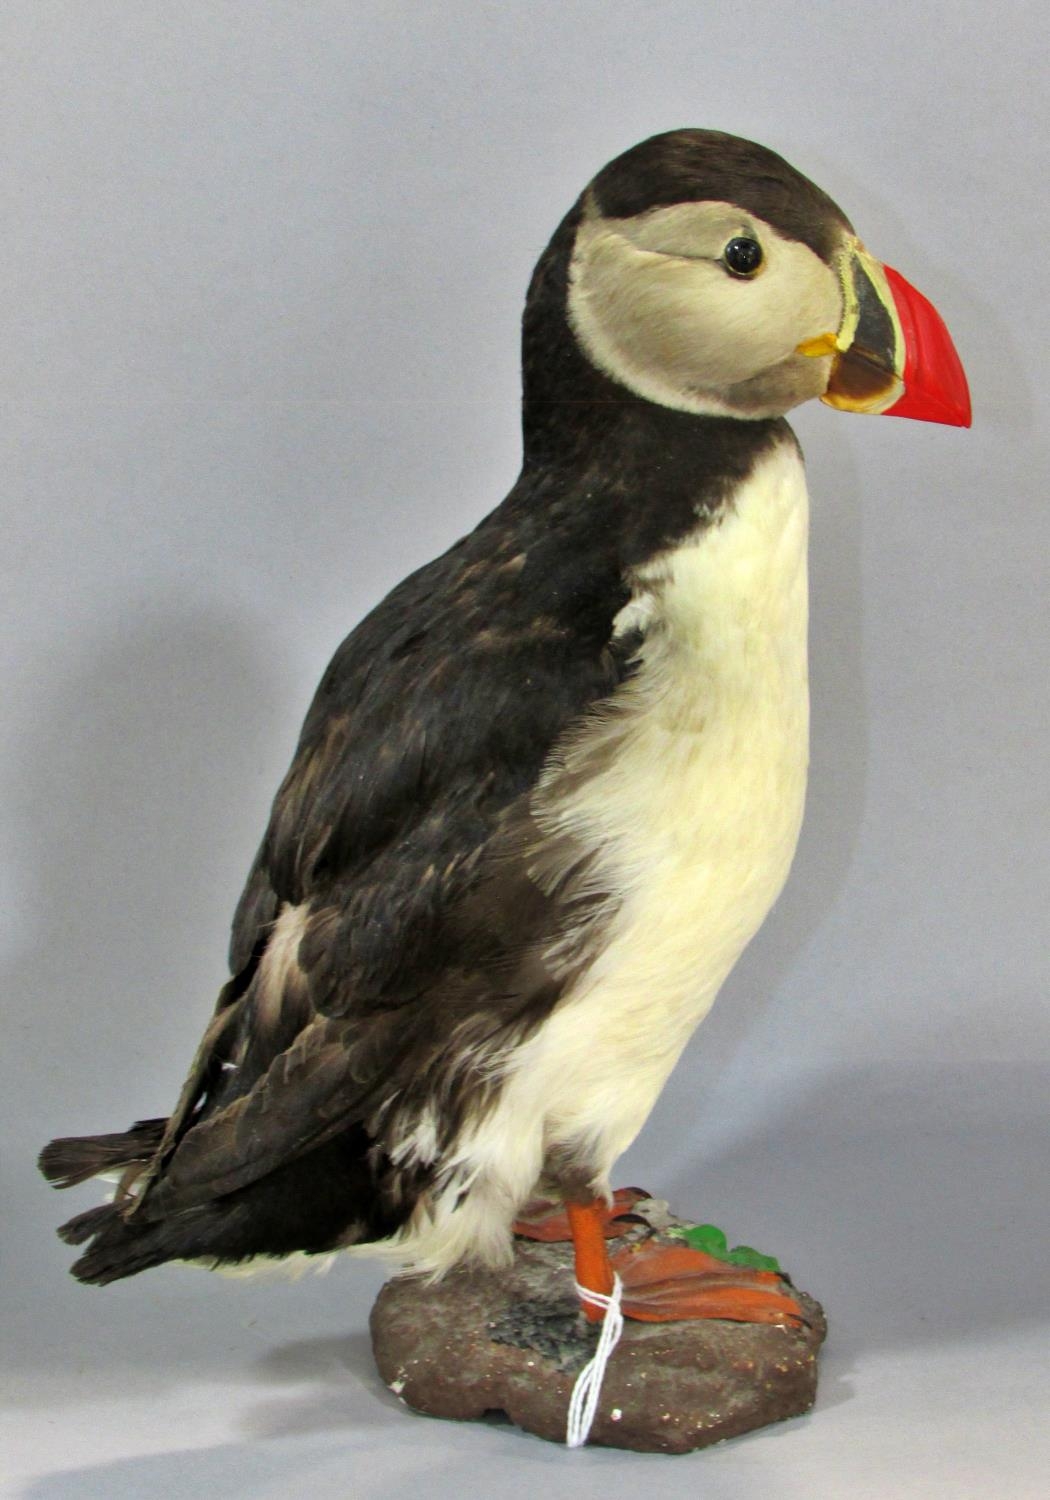 Taxidermy in the form of a Puffin Bird by Jens - Kjeld, see label to base, 25cm tall. - Image 10 of 11